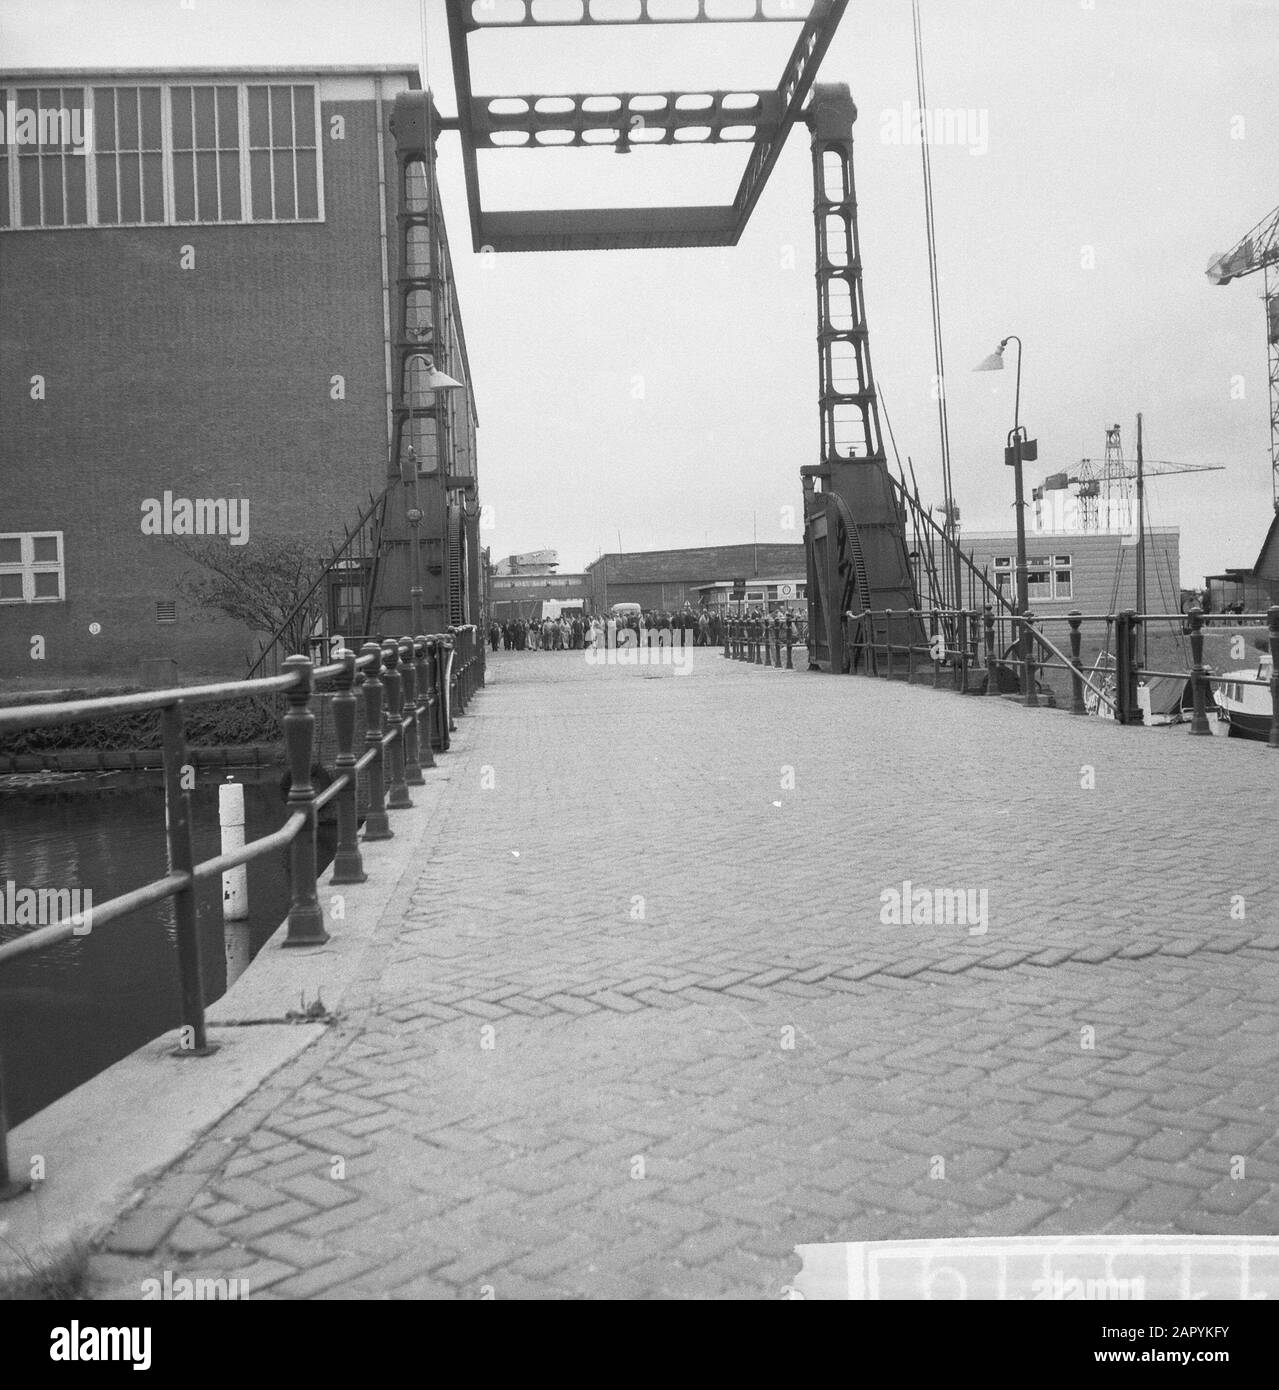 Strike at the NDSM, strikers pull over the terrain Date: 25 August 1960 Location: Amsterdam Keywords: shipbuilding Institution name: NDSM Stock Photo